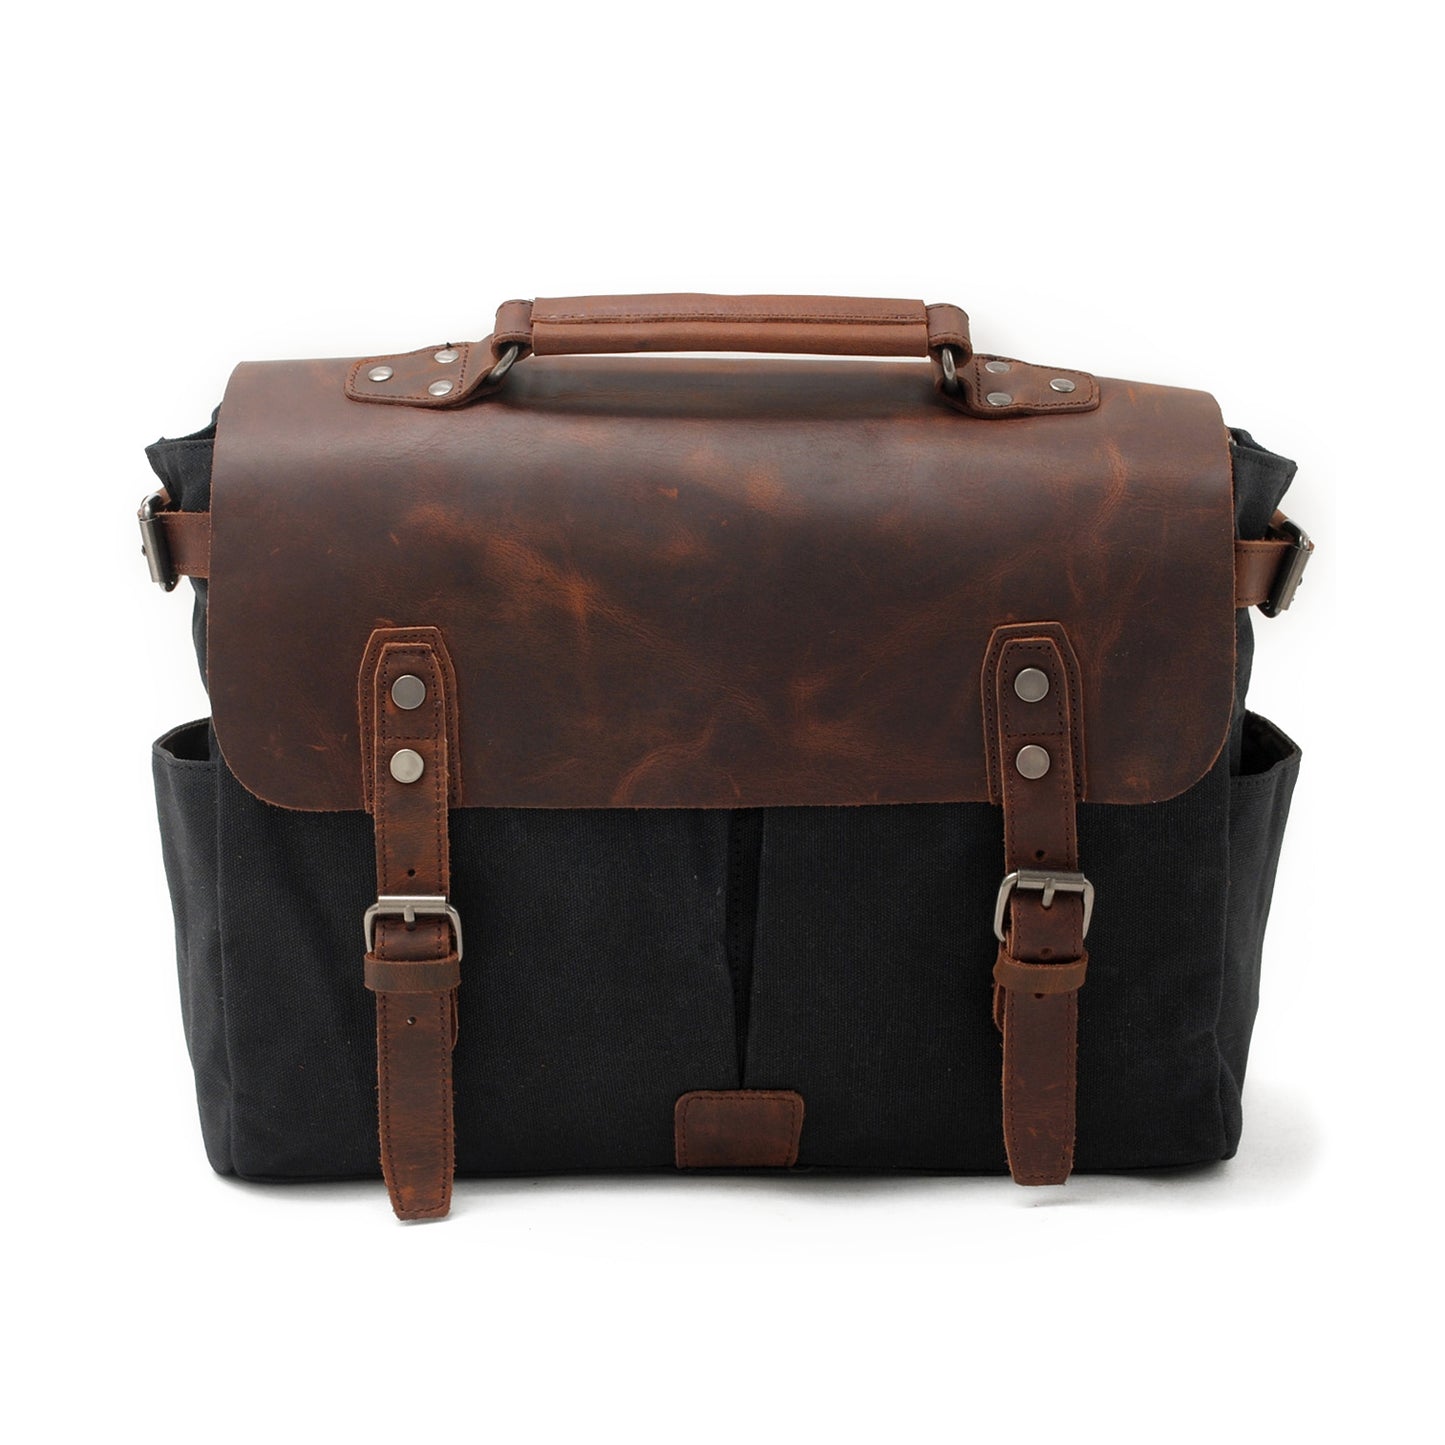 Vintage-Waxed-Canvas-and-Crazy-Horse-Leather-Laptop-Messenger-Bag-Black-i7bags-1